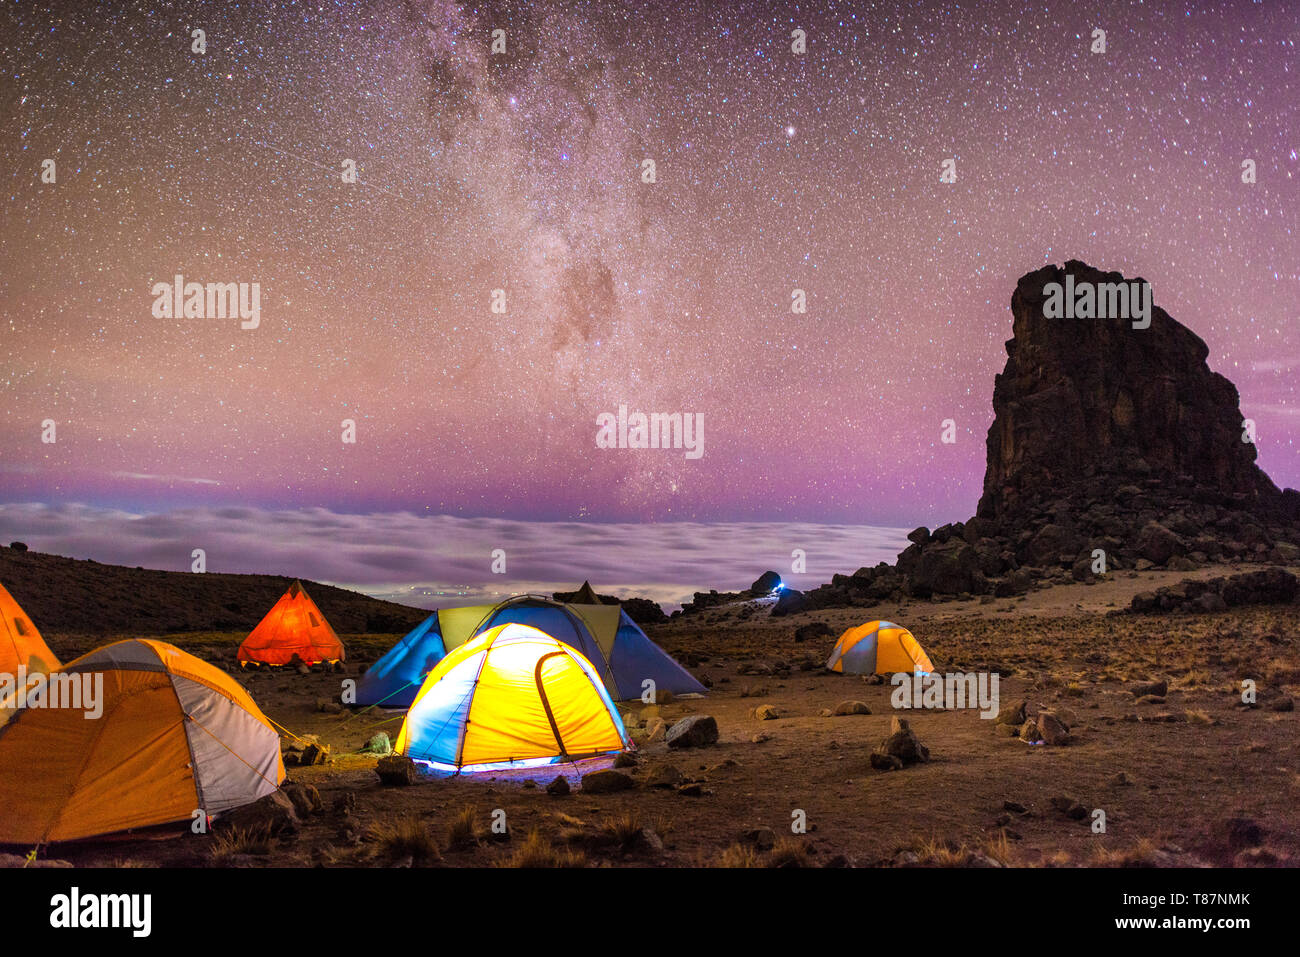 MT KILIMANJARO, Tanzania — The brilliantly clear night sky at Lava Tower Camp (15,215 feet), with Lava Tower at right, clouds in the distance, and the Milky Way. Mt Kilimanjaro's Lemosho Route. Far beyond the tents you can see lights from a town far below. The band of light running near vertically through the sky is the Milky Way. Stock Photo